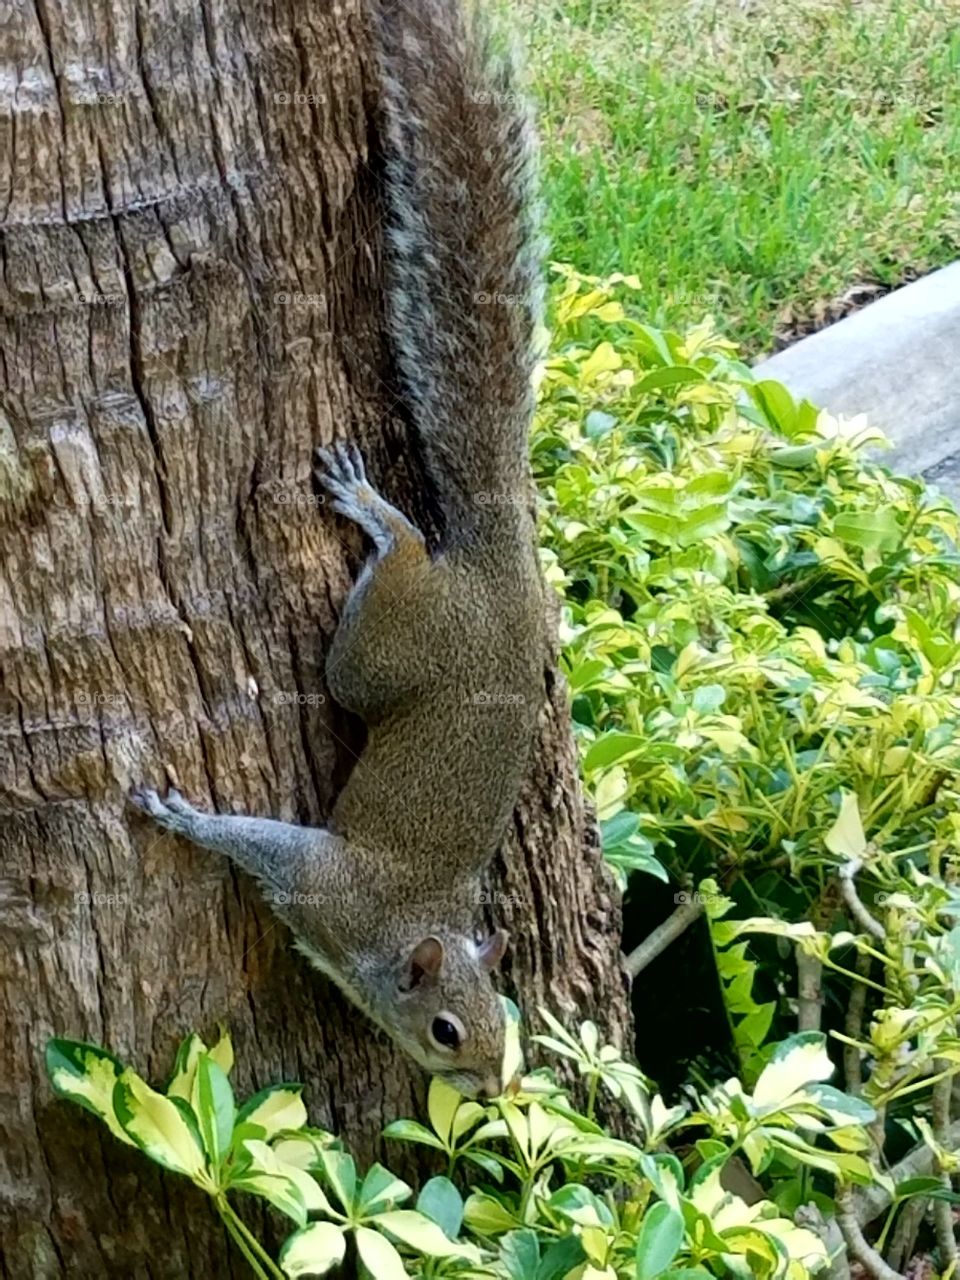 Squirrel Quickly Leaving Tree